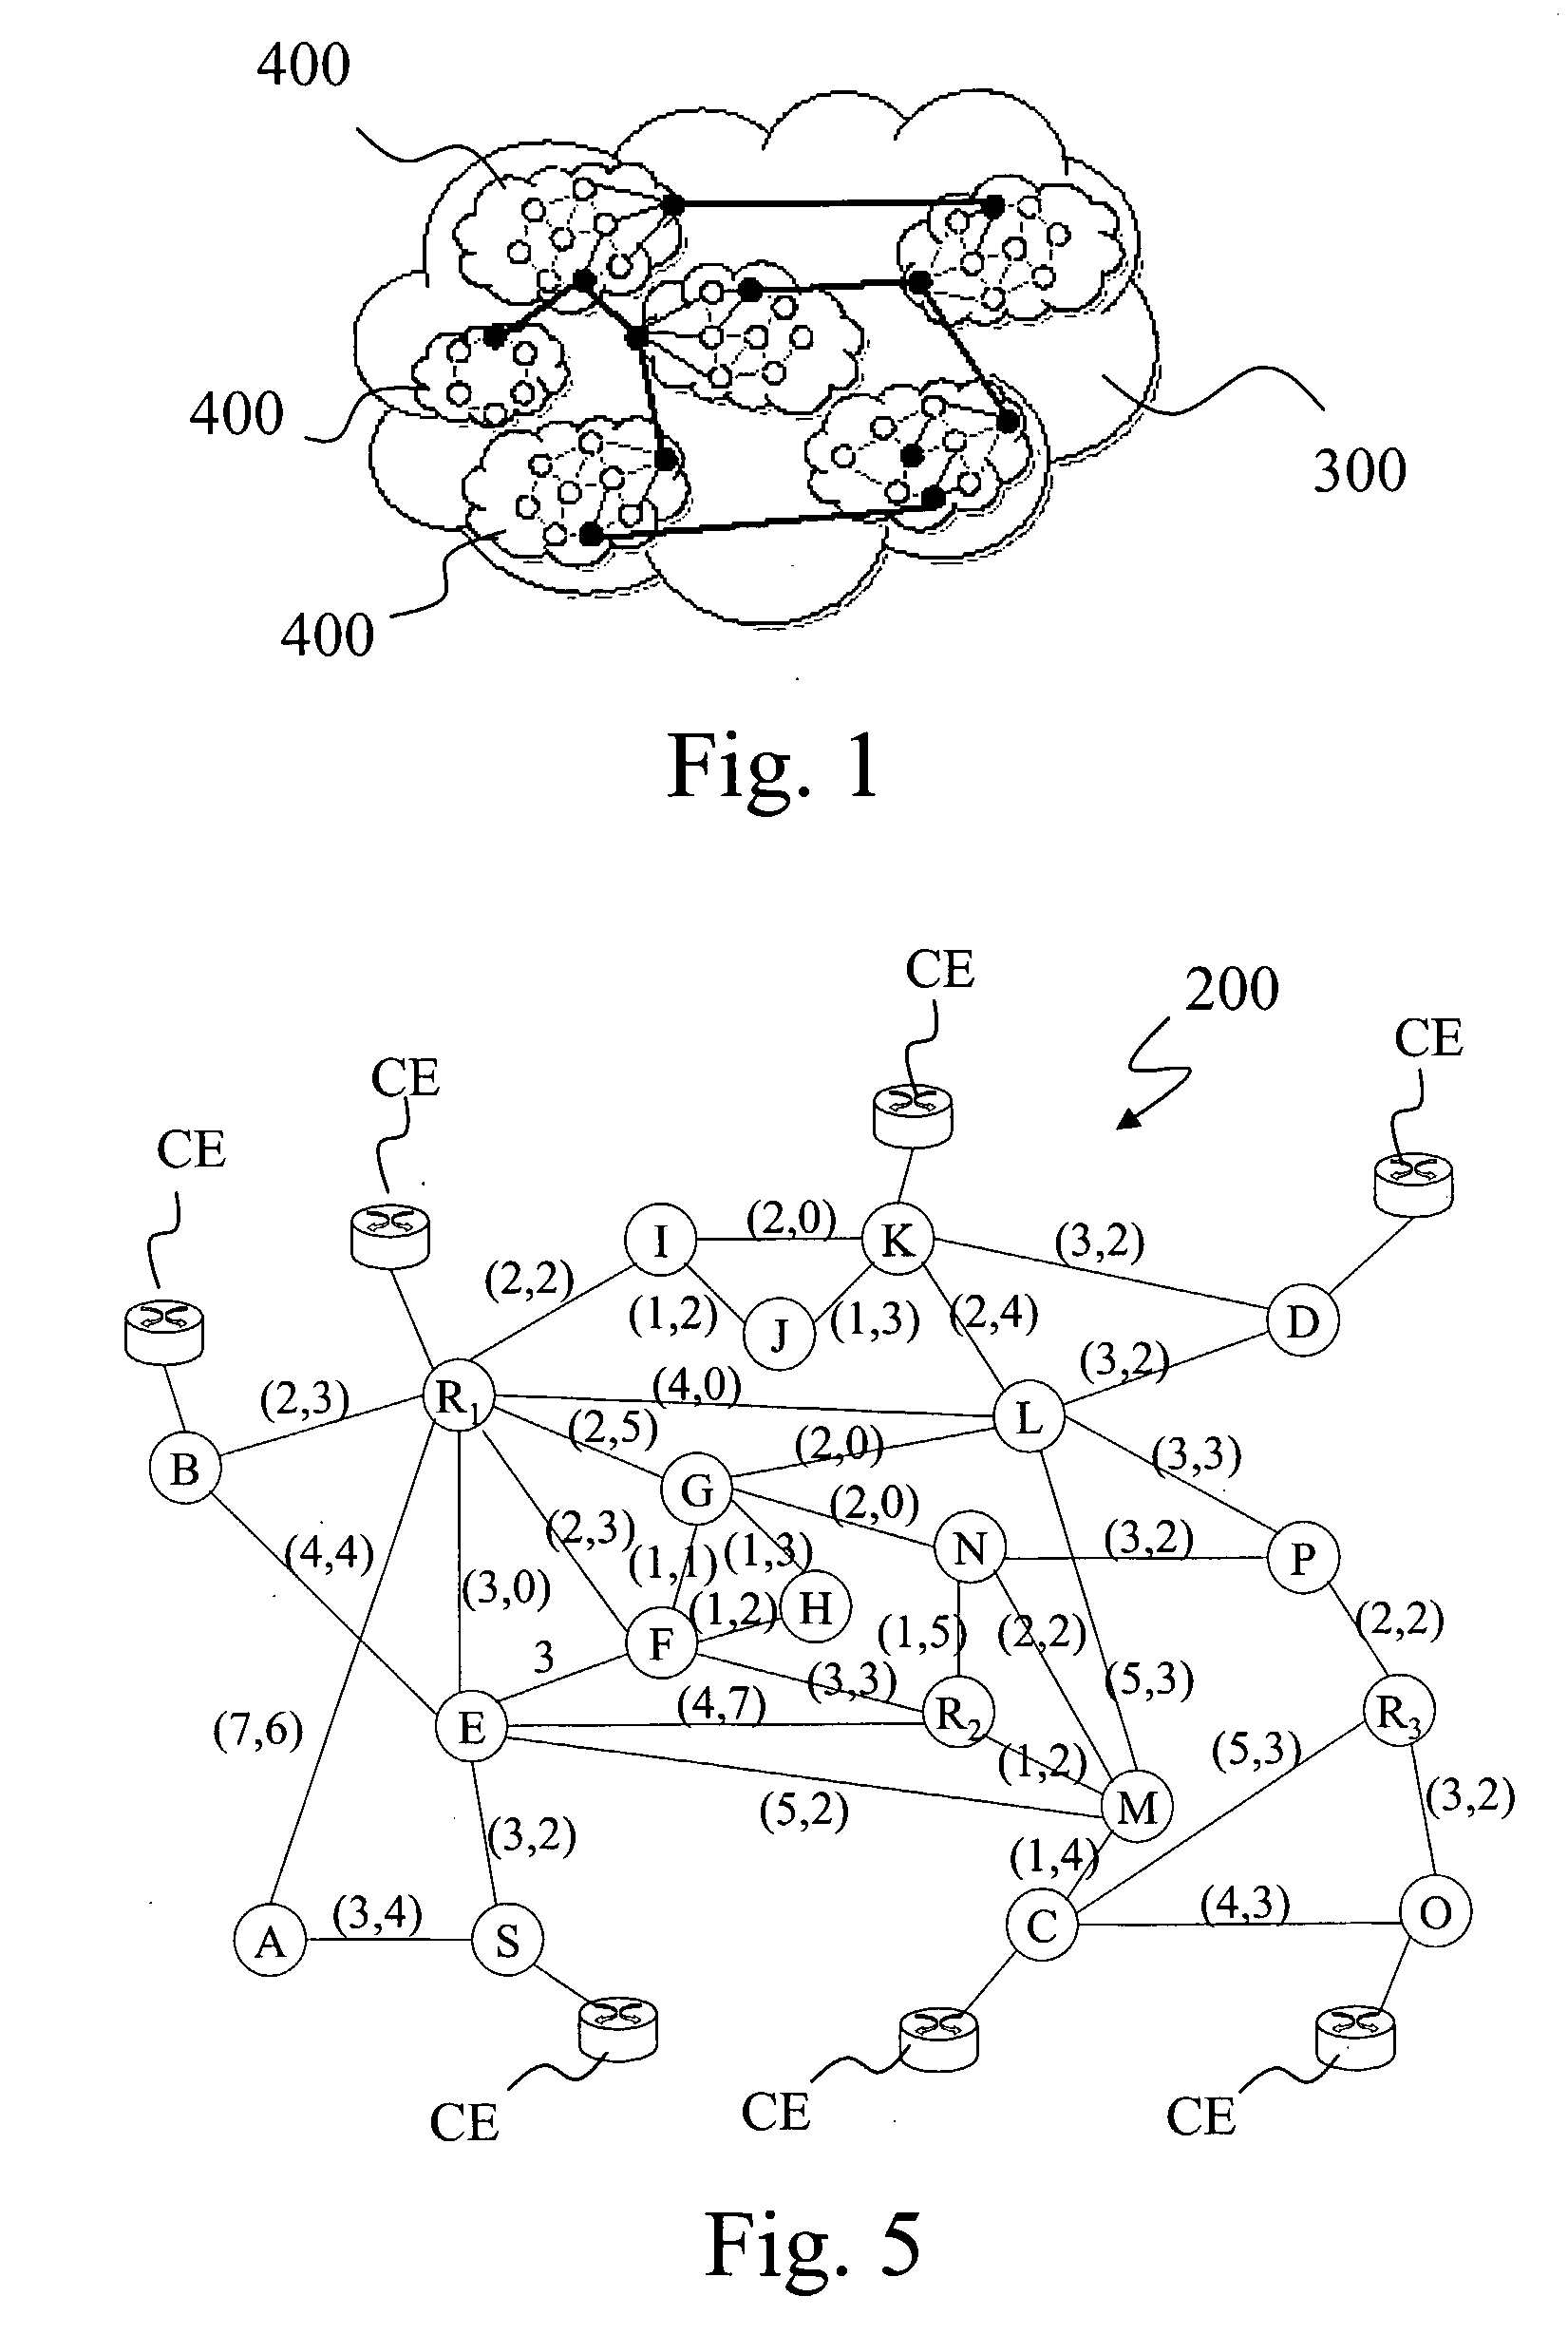 Optimized Dynamic Routing in a network, in particular in an optical telecommunication network